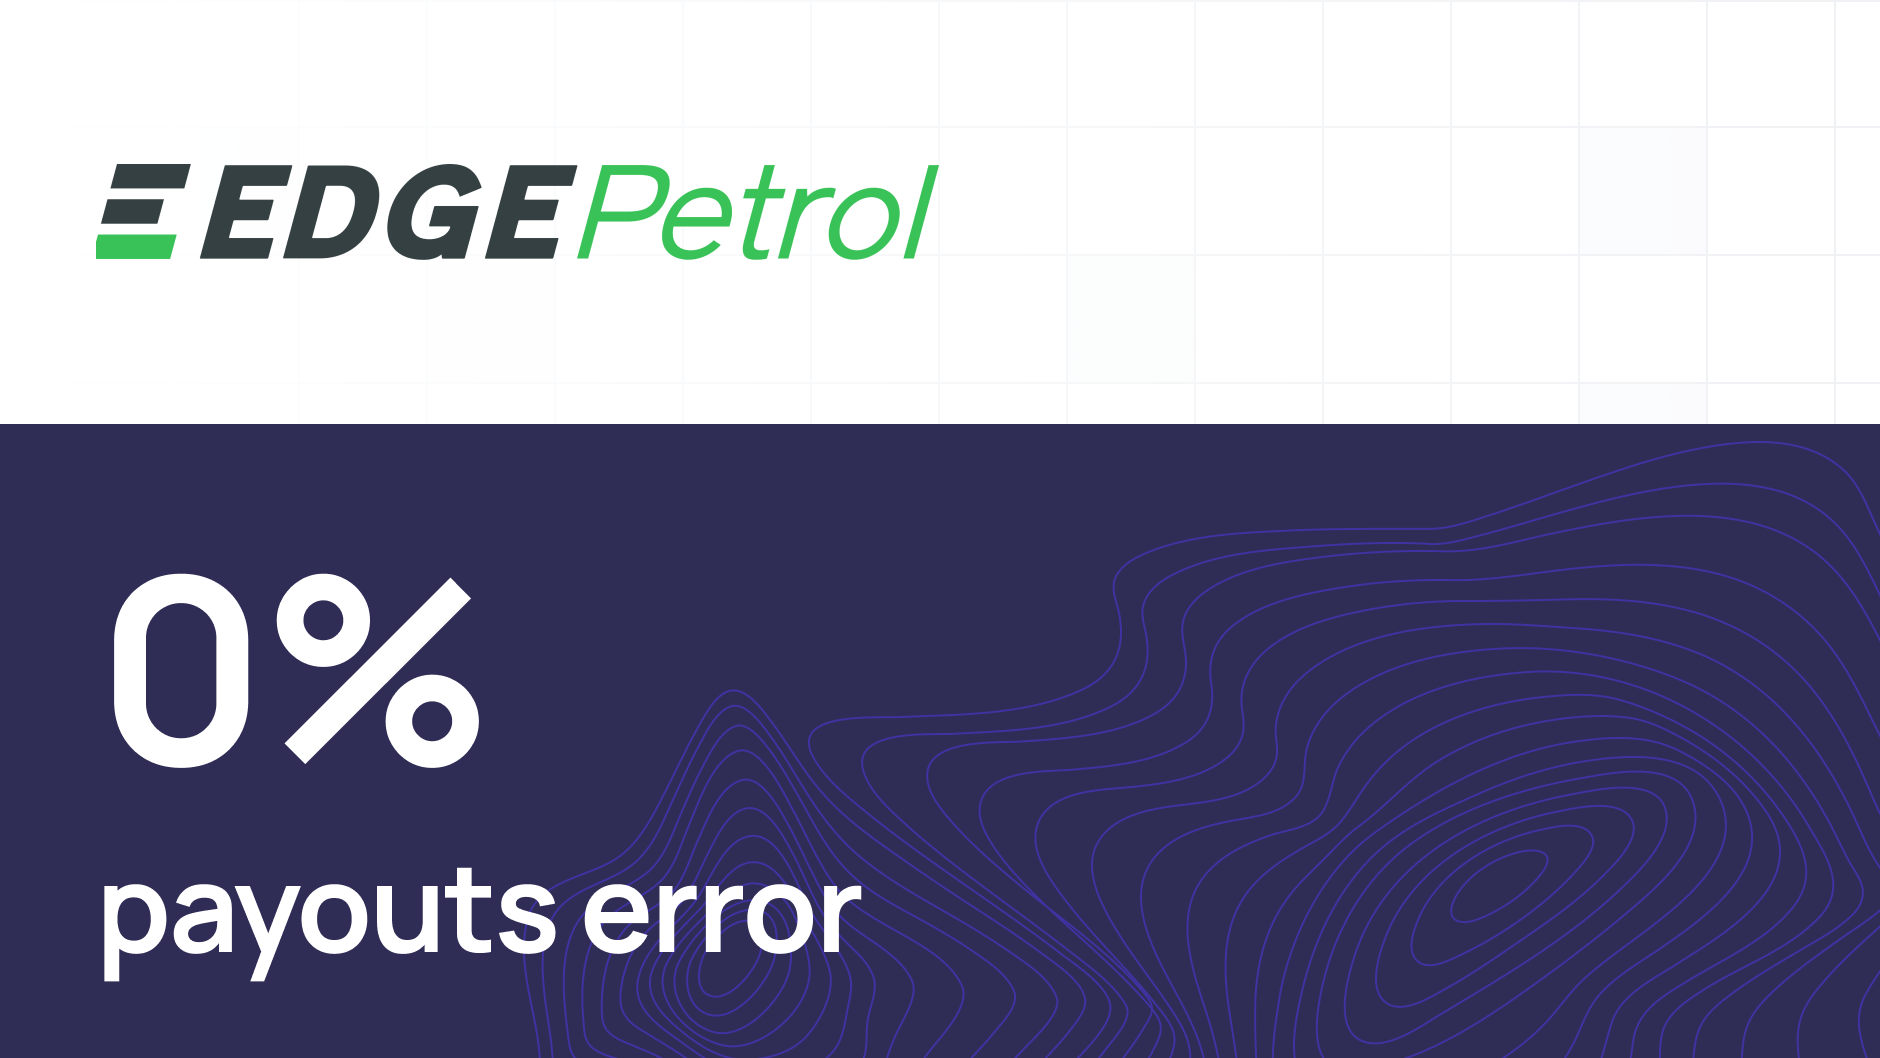 How EdgePetrol switched to 0% payout errors